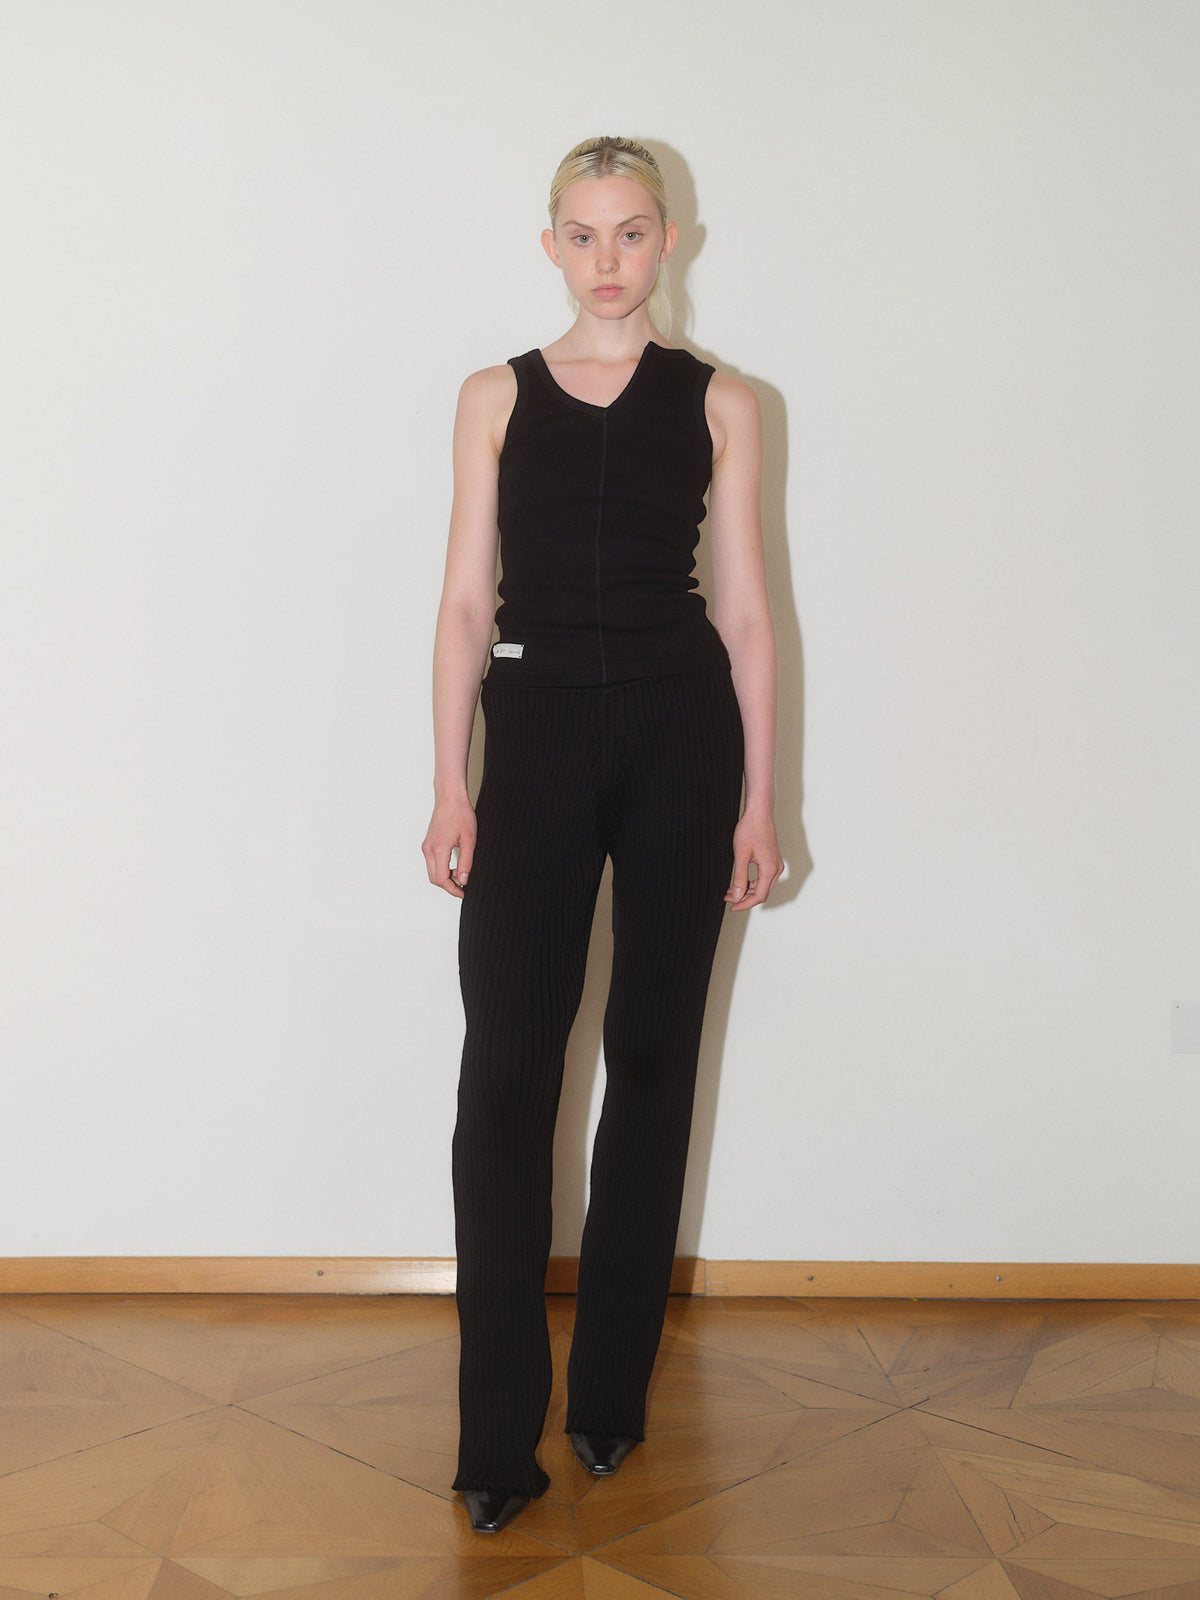 Ribbed Wool Pants designed by Christina Seewald. Sustainable, designed and made in Europe. Best Quality Yarns from Italy.